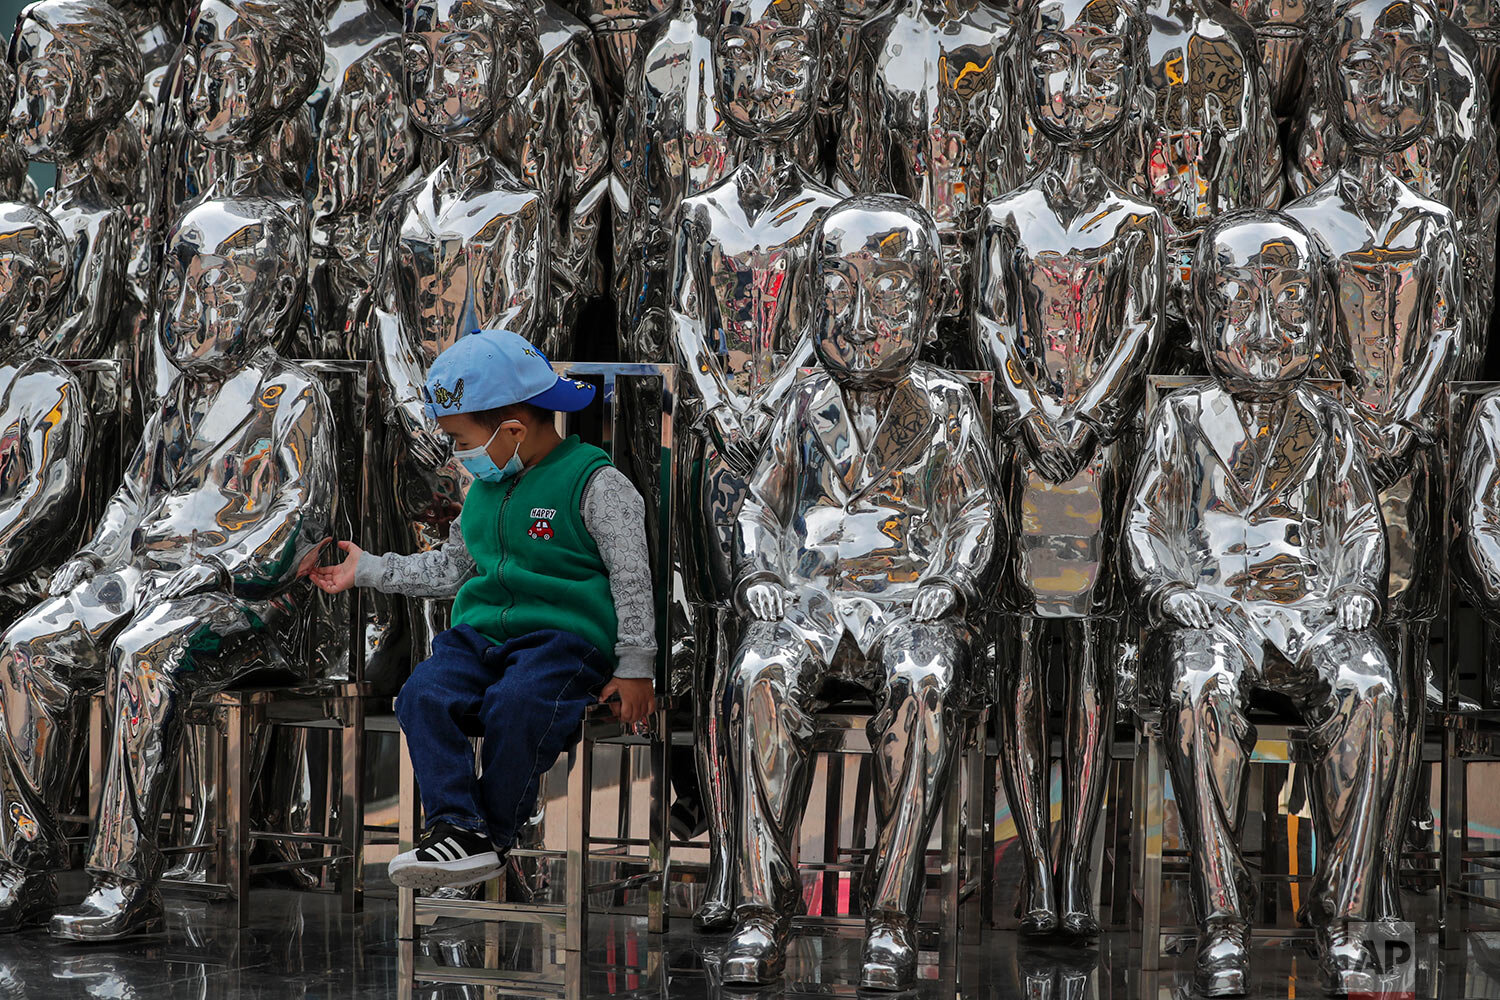  A child wearing a face mask to help curb the spread of the coronavirus tries to hold a statue's hand as he sits in an art installation on display at a shopping mall in Beijing, Sunday, Oct. 11, 2020. (AP Photo/Andy Wong) 